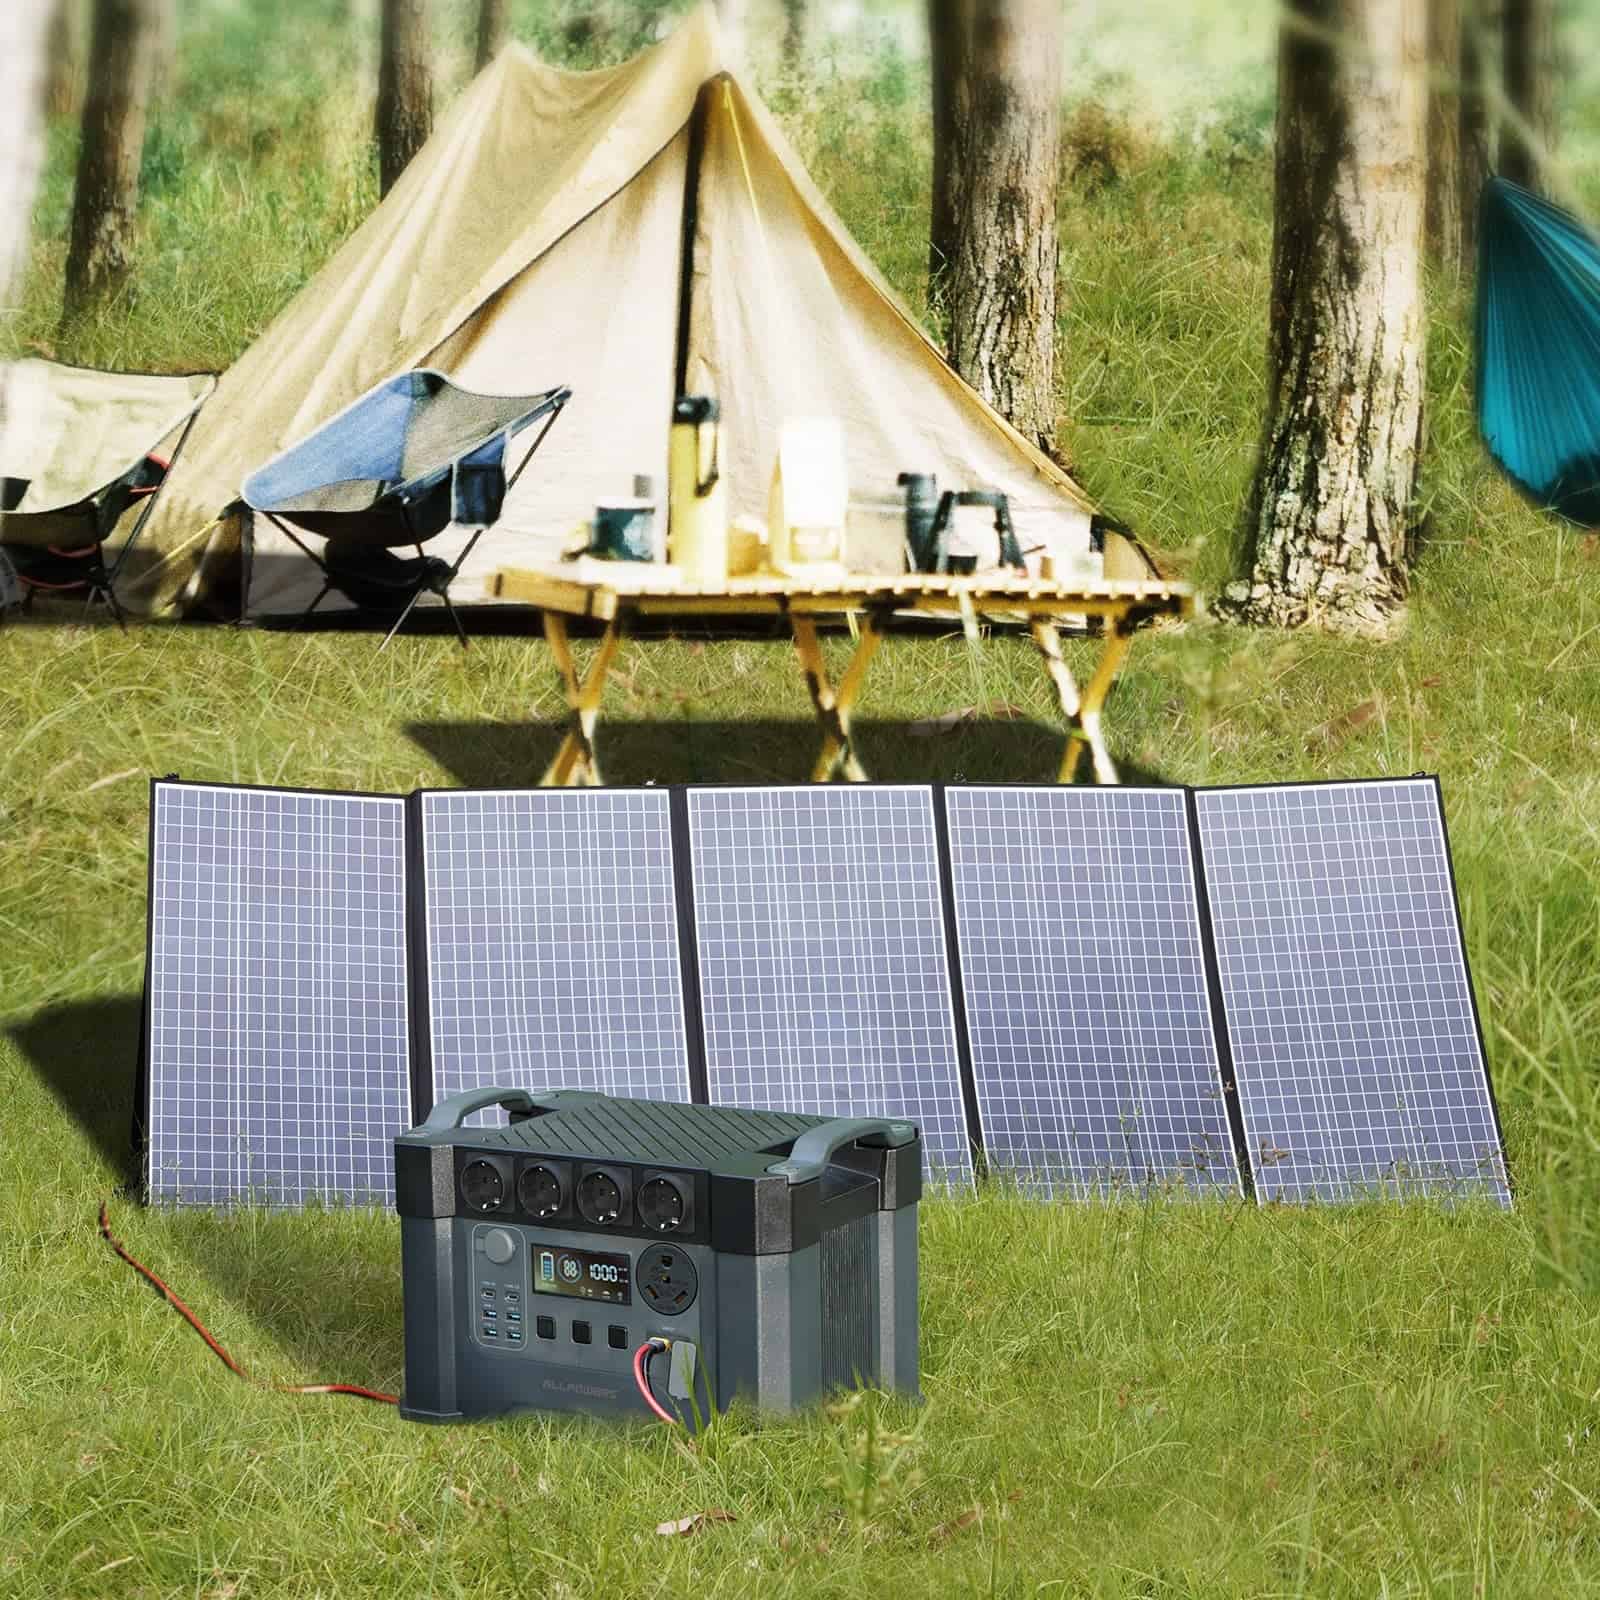 ALLPOWERS SP037 Portable Solar Panel 400W Review